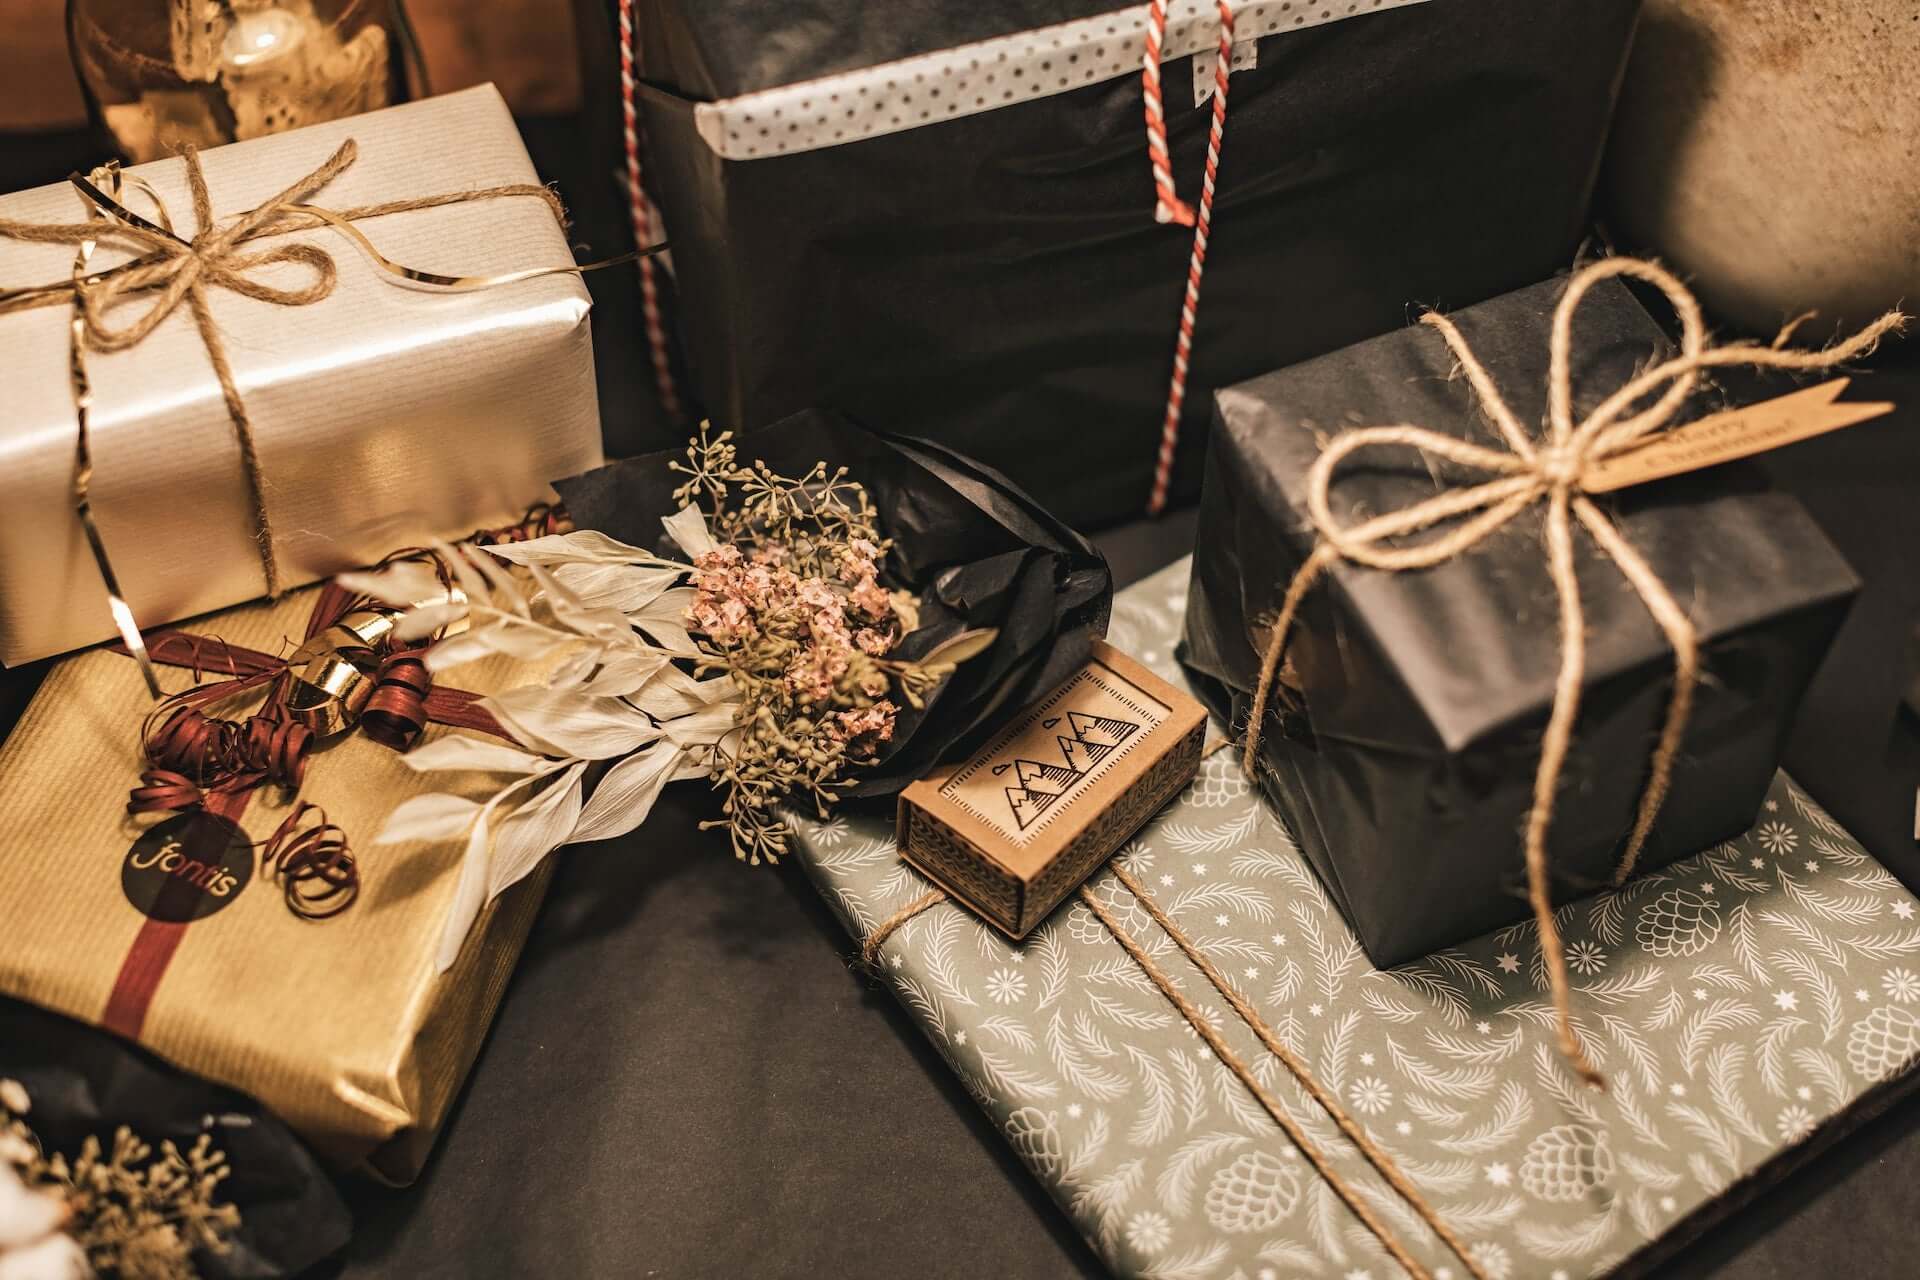 A series of gifts with earth-toned wrapping.